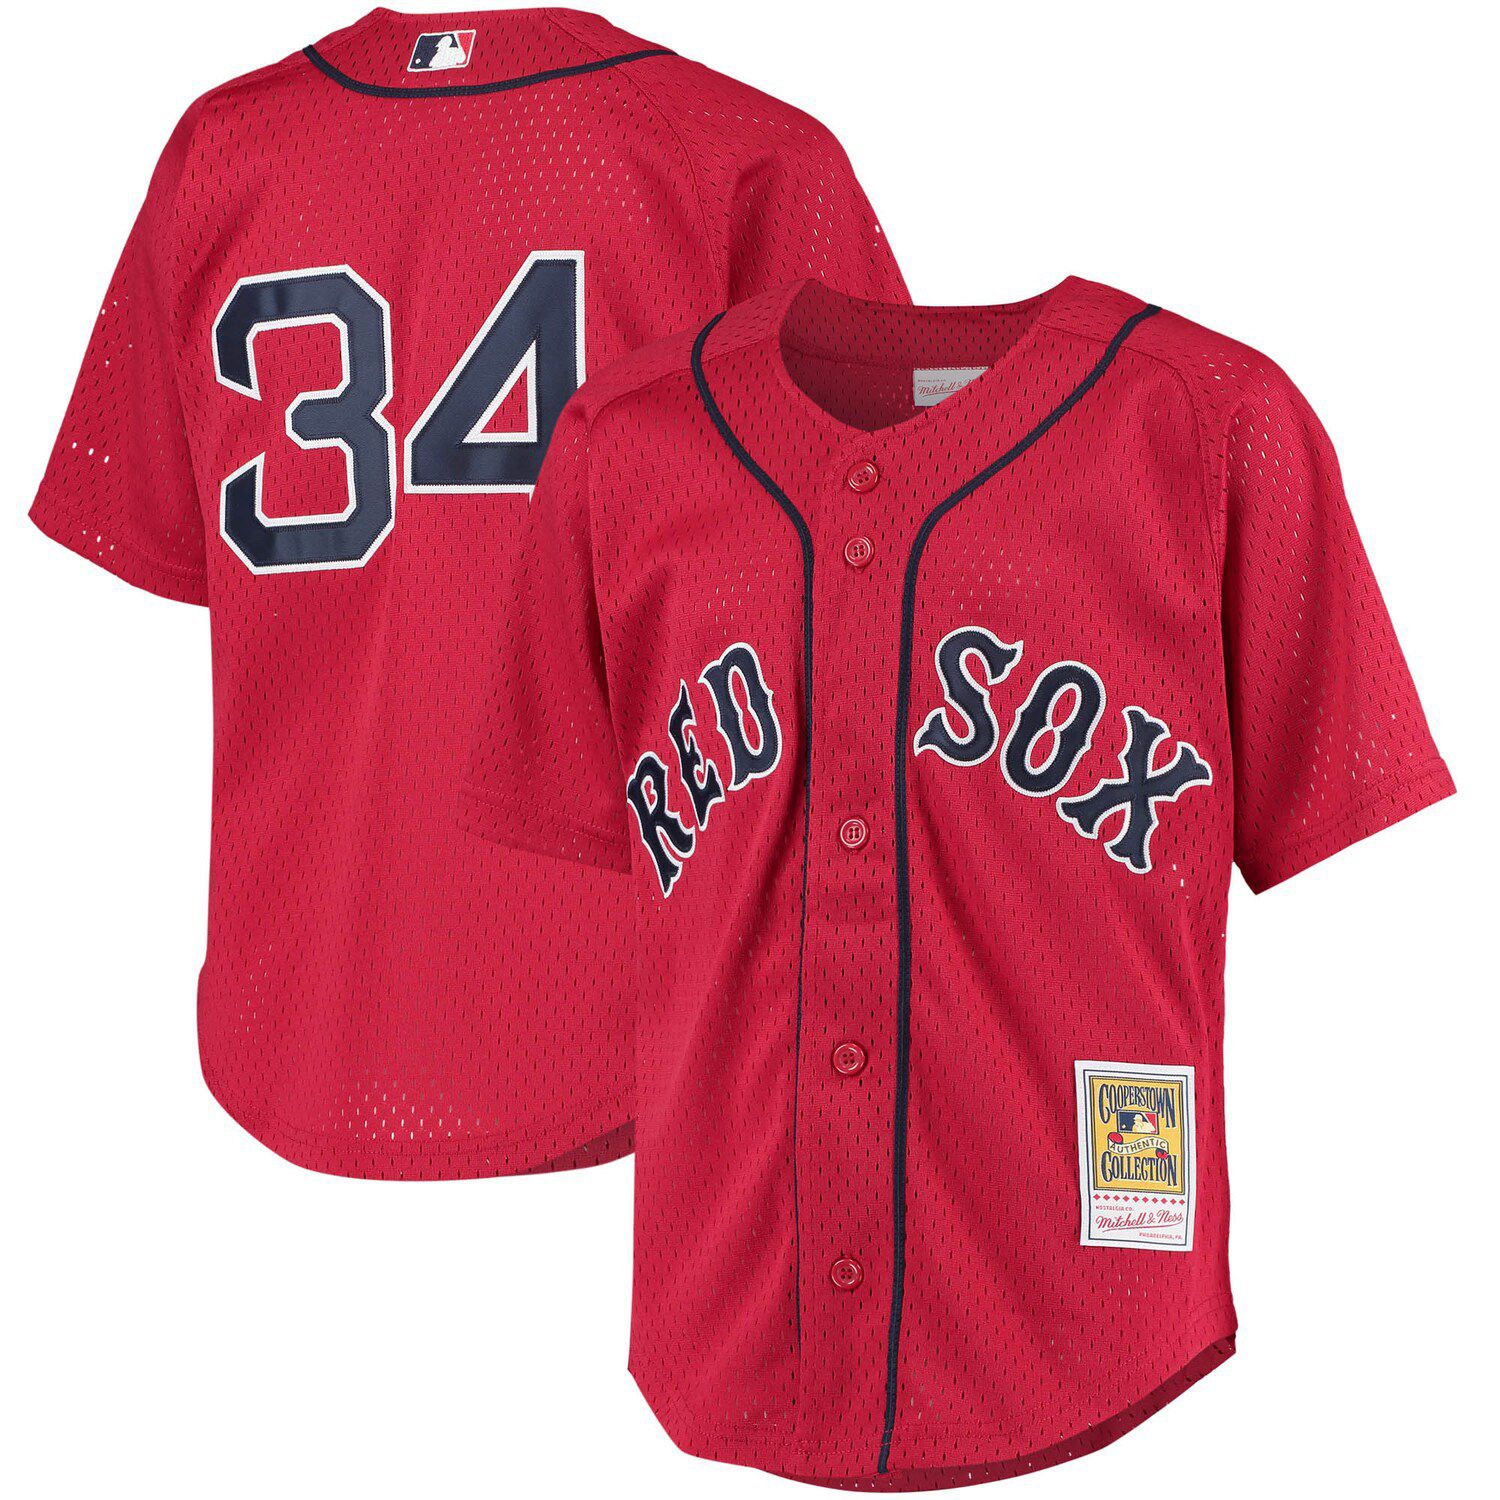 Authentic Pedro Martinez Boston Red Sox 1999 Jersey - Shop Mitchell & Ness  Authentic Jerseys and Replicas Mitchell & Ness Nostalgia Co.